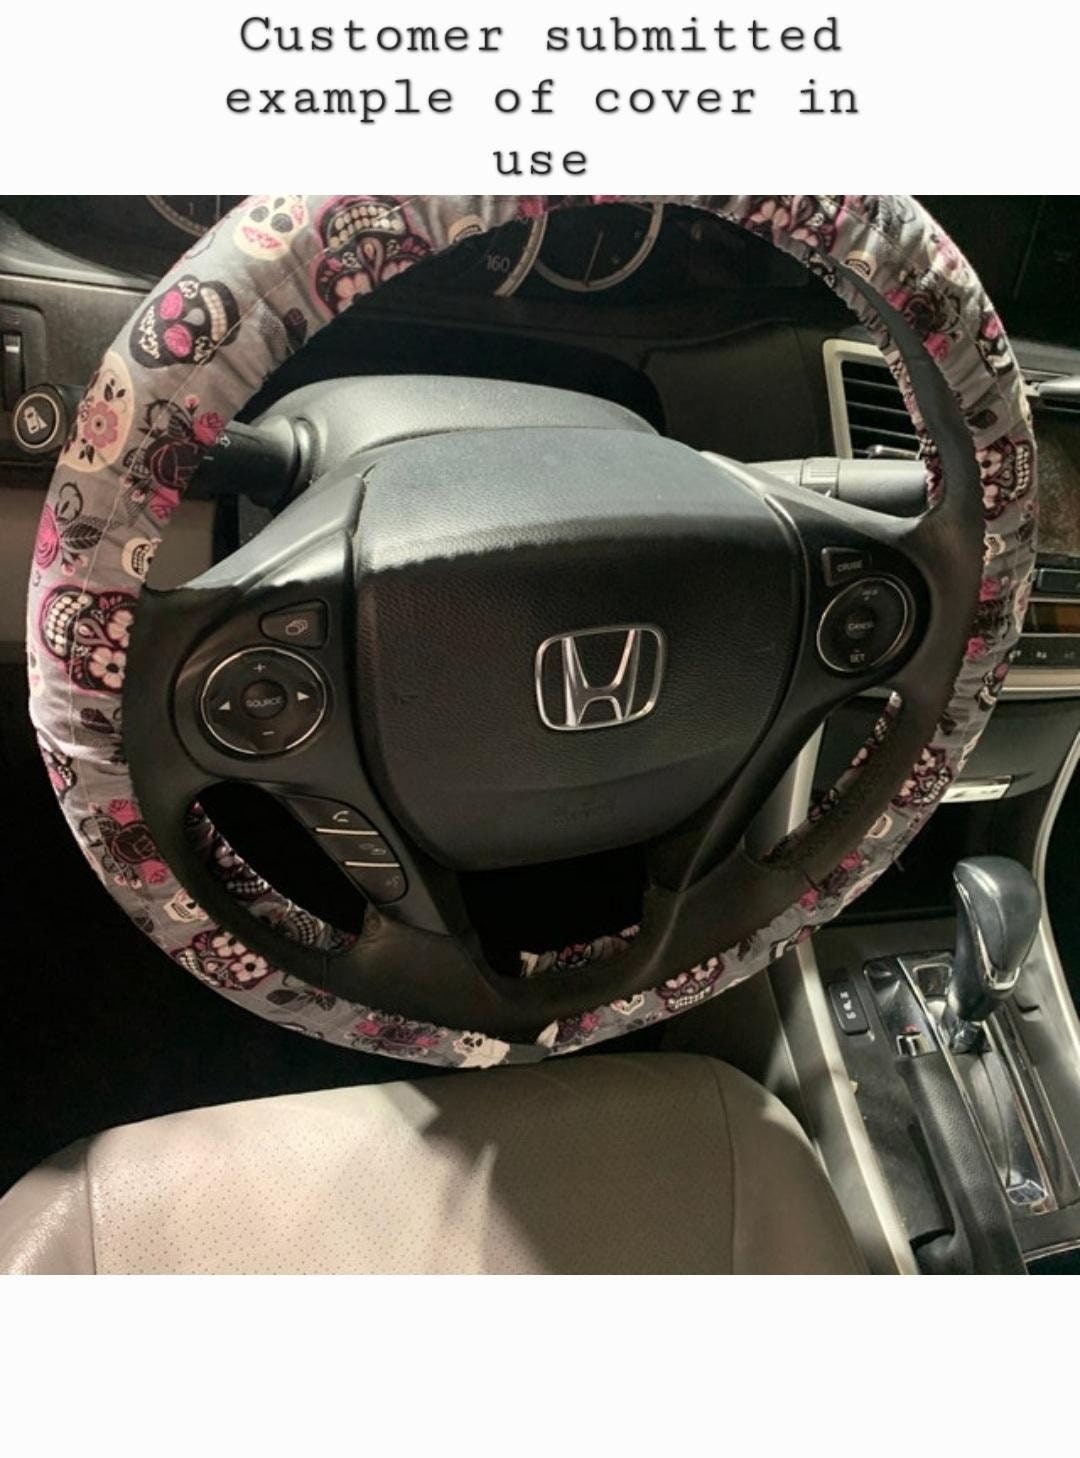 Pink Floral Steering Wheel Cover, 100% Cotton, Washable, Custom Car Accessories - Harlow's Store and Garden Gifts